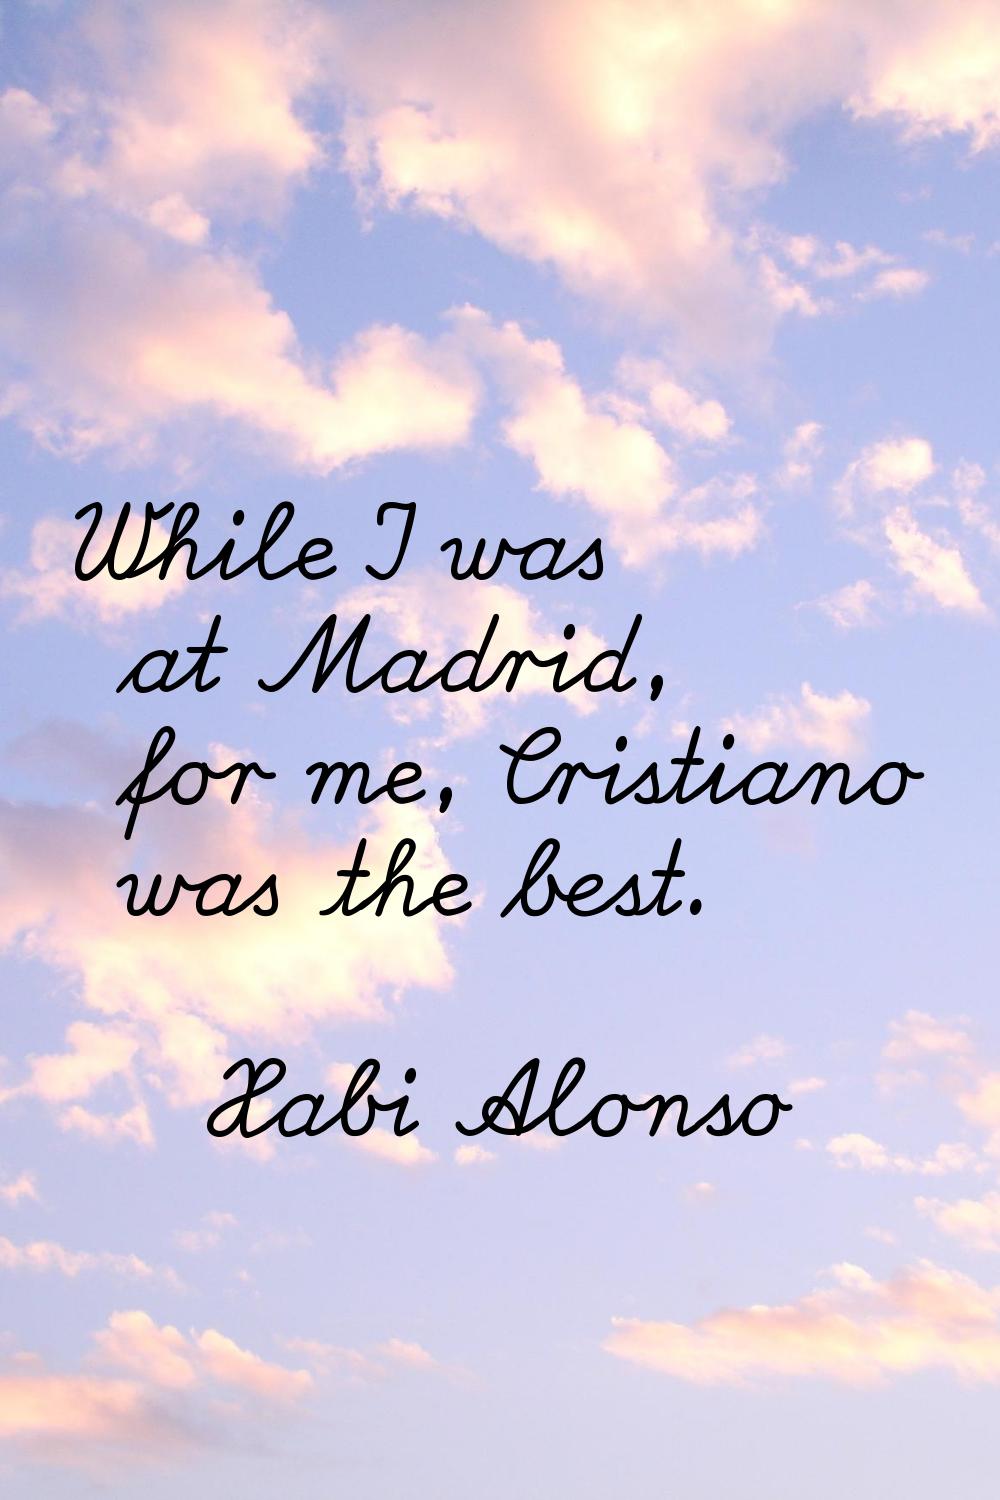 While I was at Madrid, for me, Cristiano was the best.